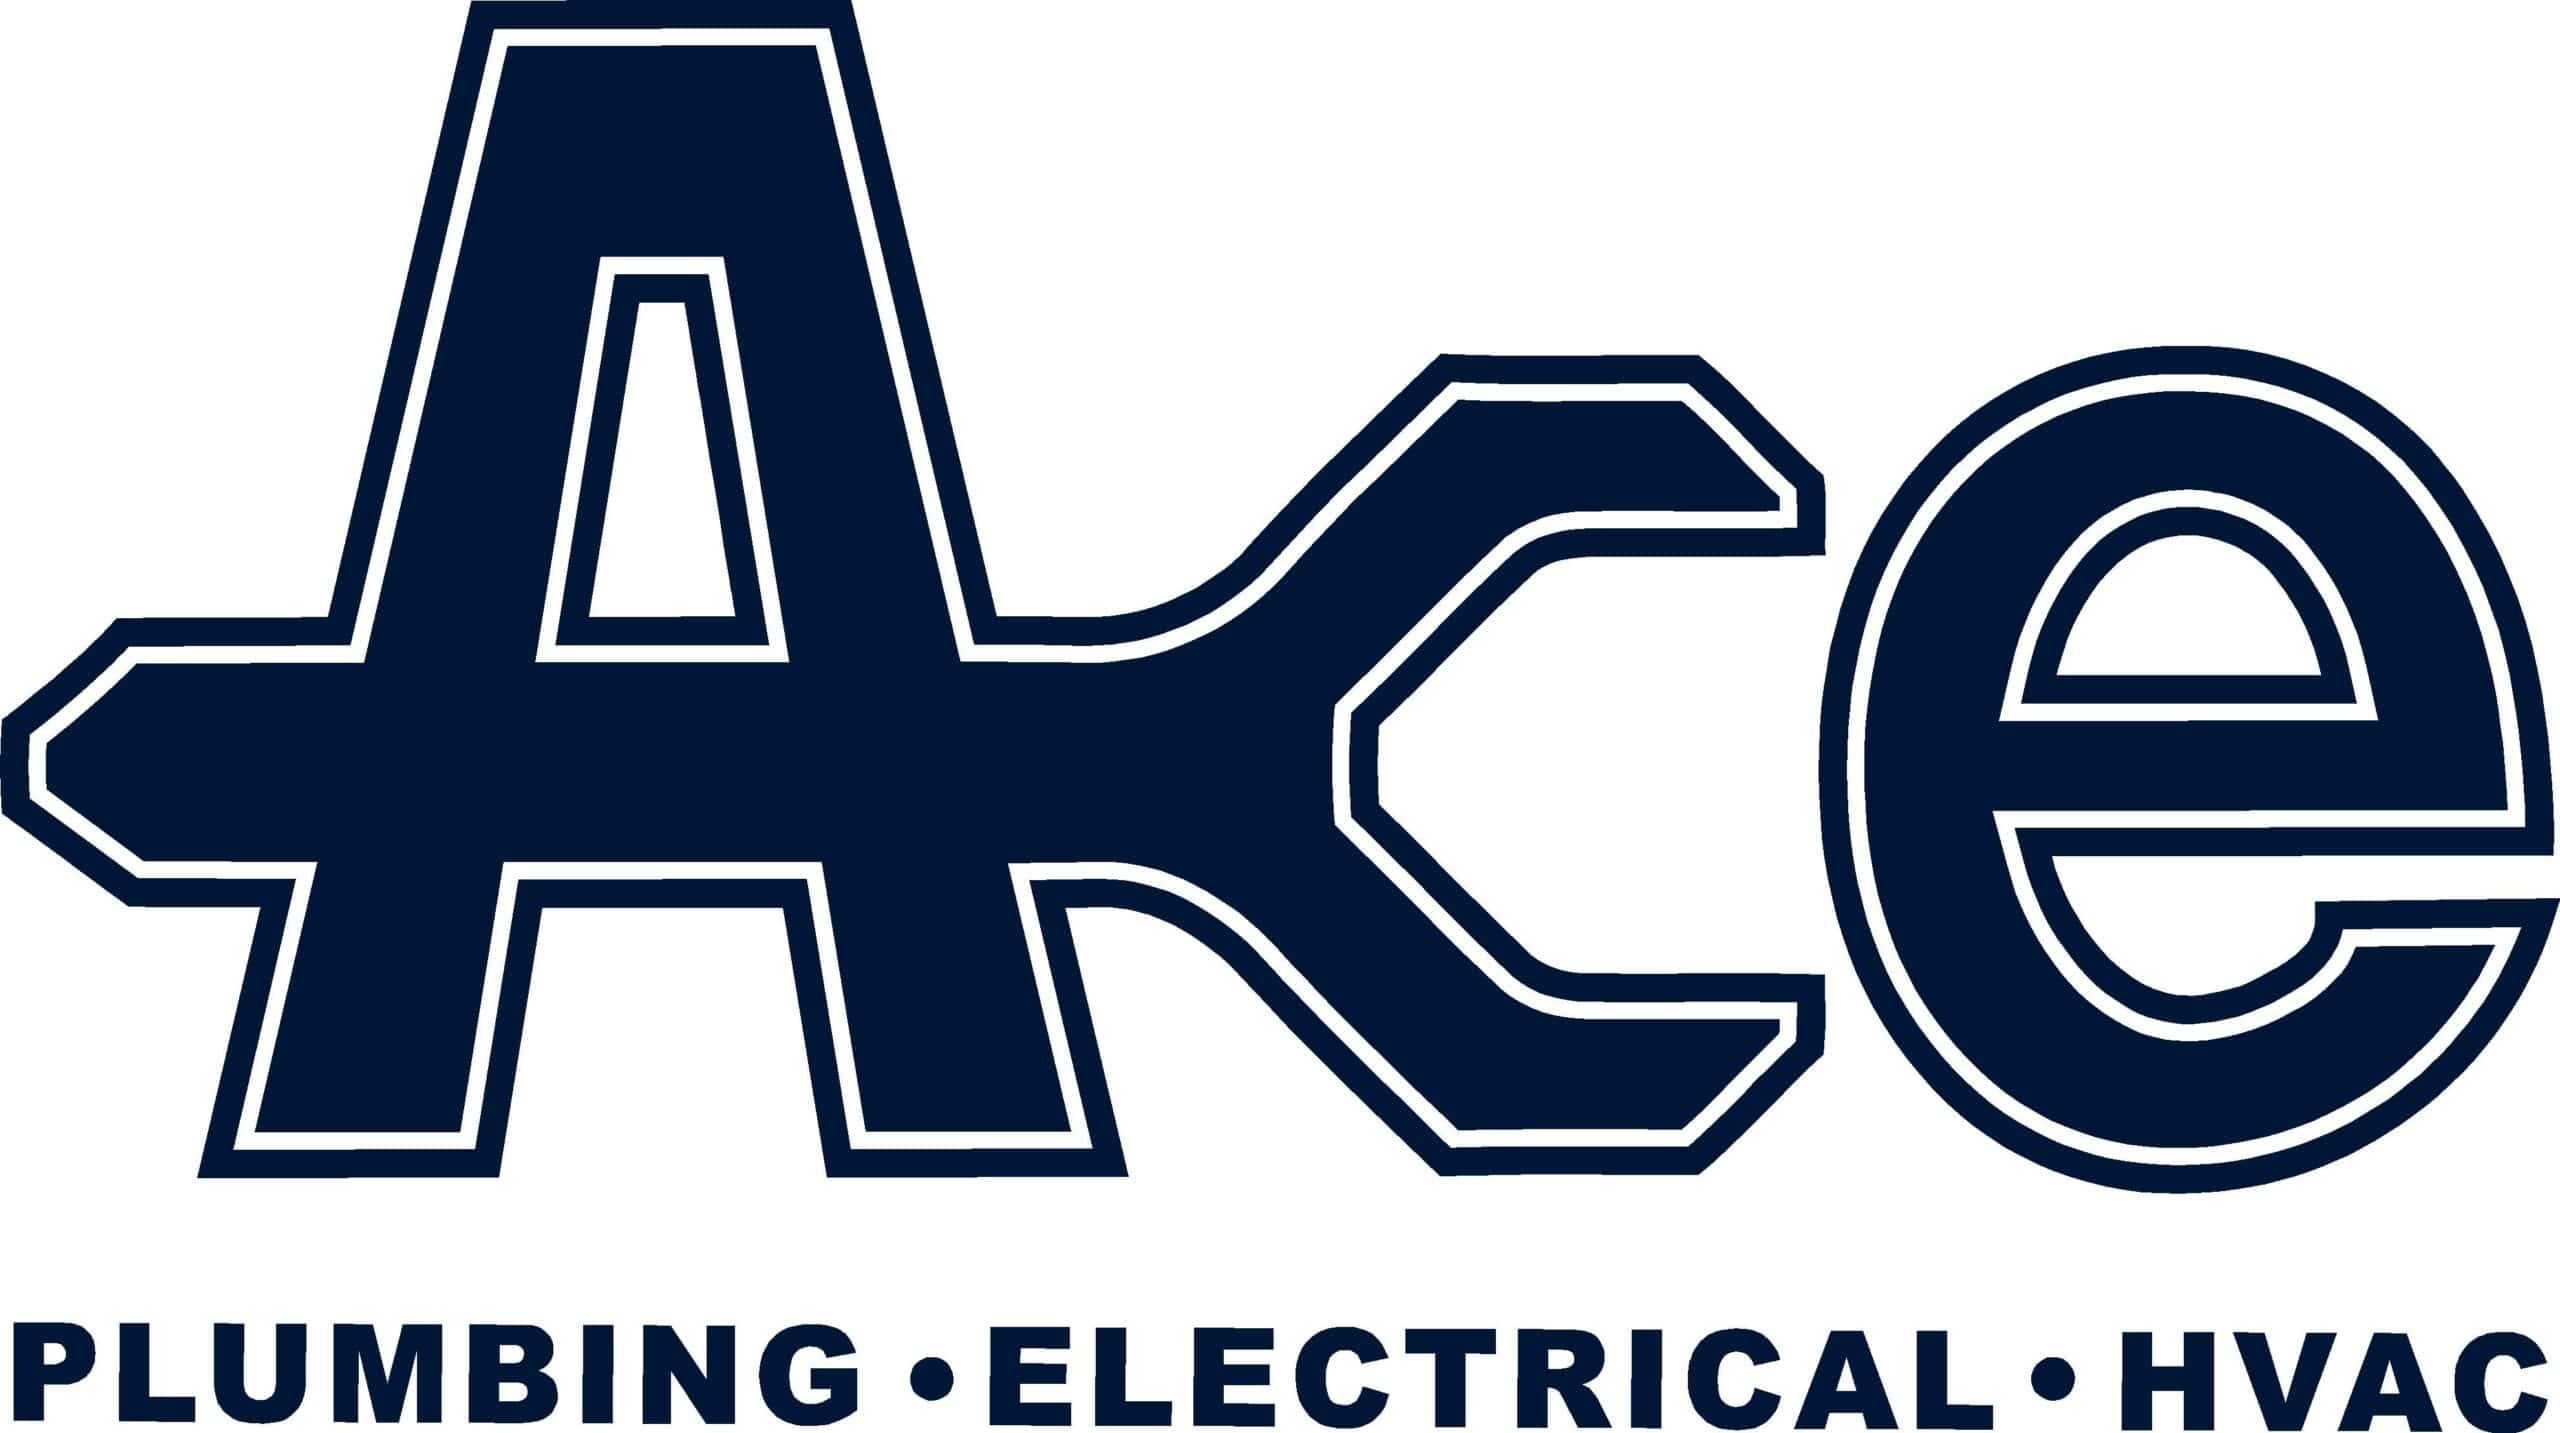 Ace Plumbing, Electric, Heating & Air Outlines the Importance of Working with Professional HVAC Contractors 